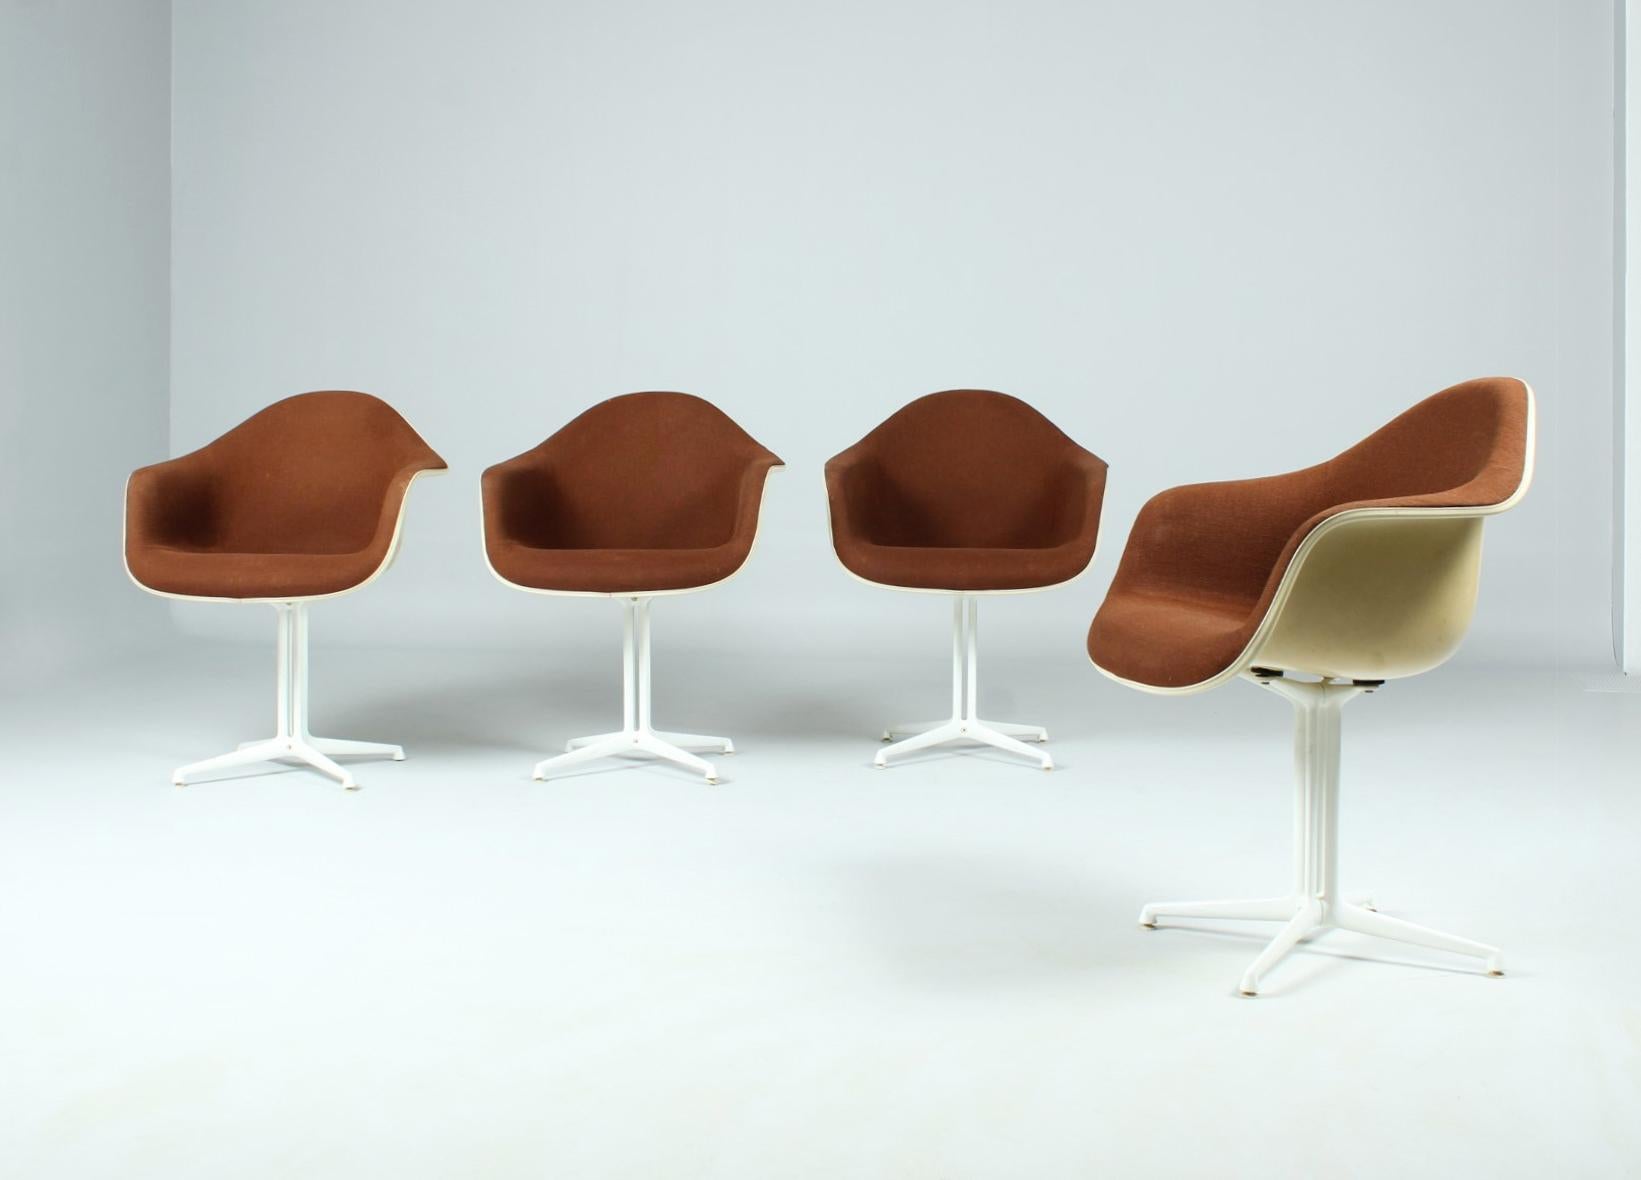 Seating group La Fonda, design by Charles & Ray Eames from 1961.

The set consists of four arm chairs, two chairs and an extendable table. Original fabric upholstery.
Visible signs of use. One of the arm chairs has a seam partially open. On the